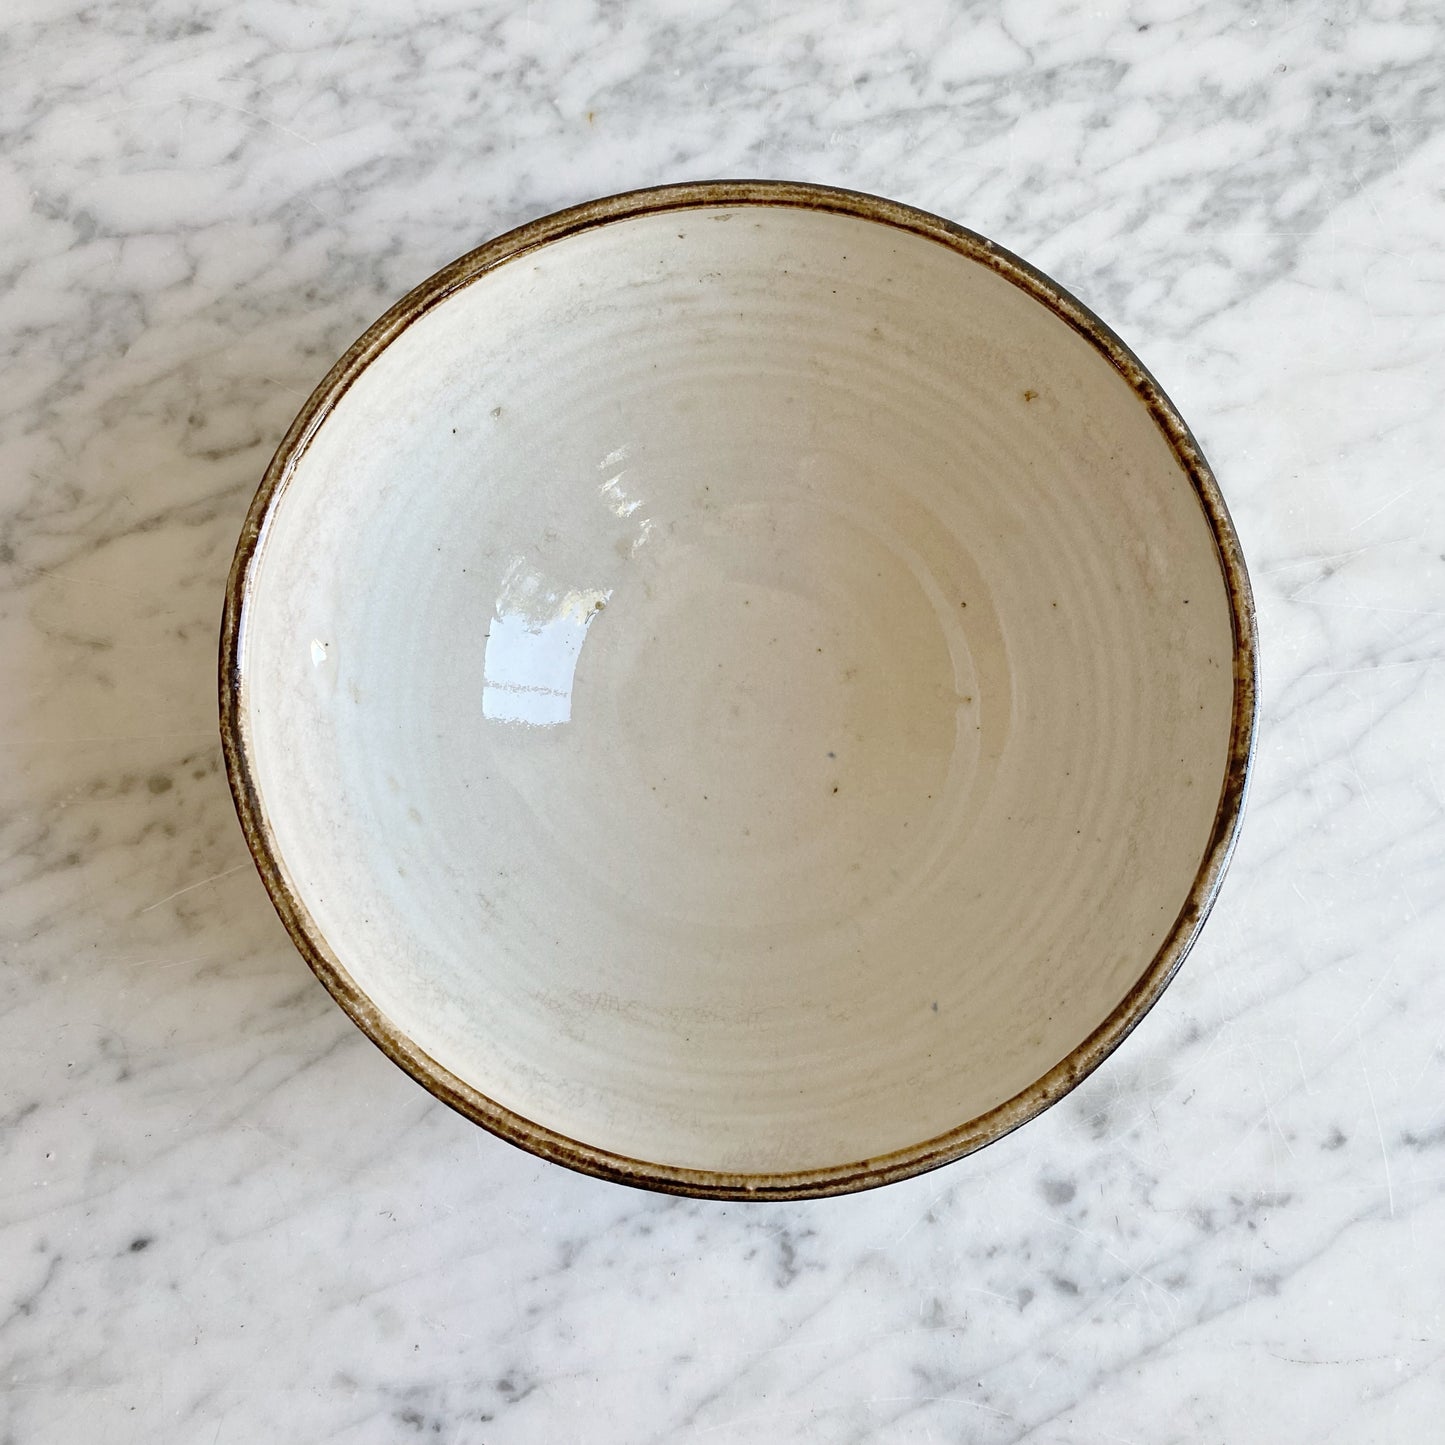 Vintage Pottery Bowl with "Wavy" Rim